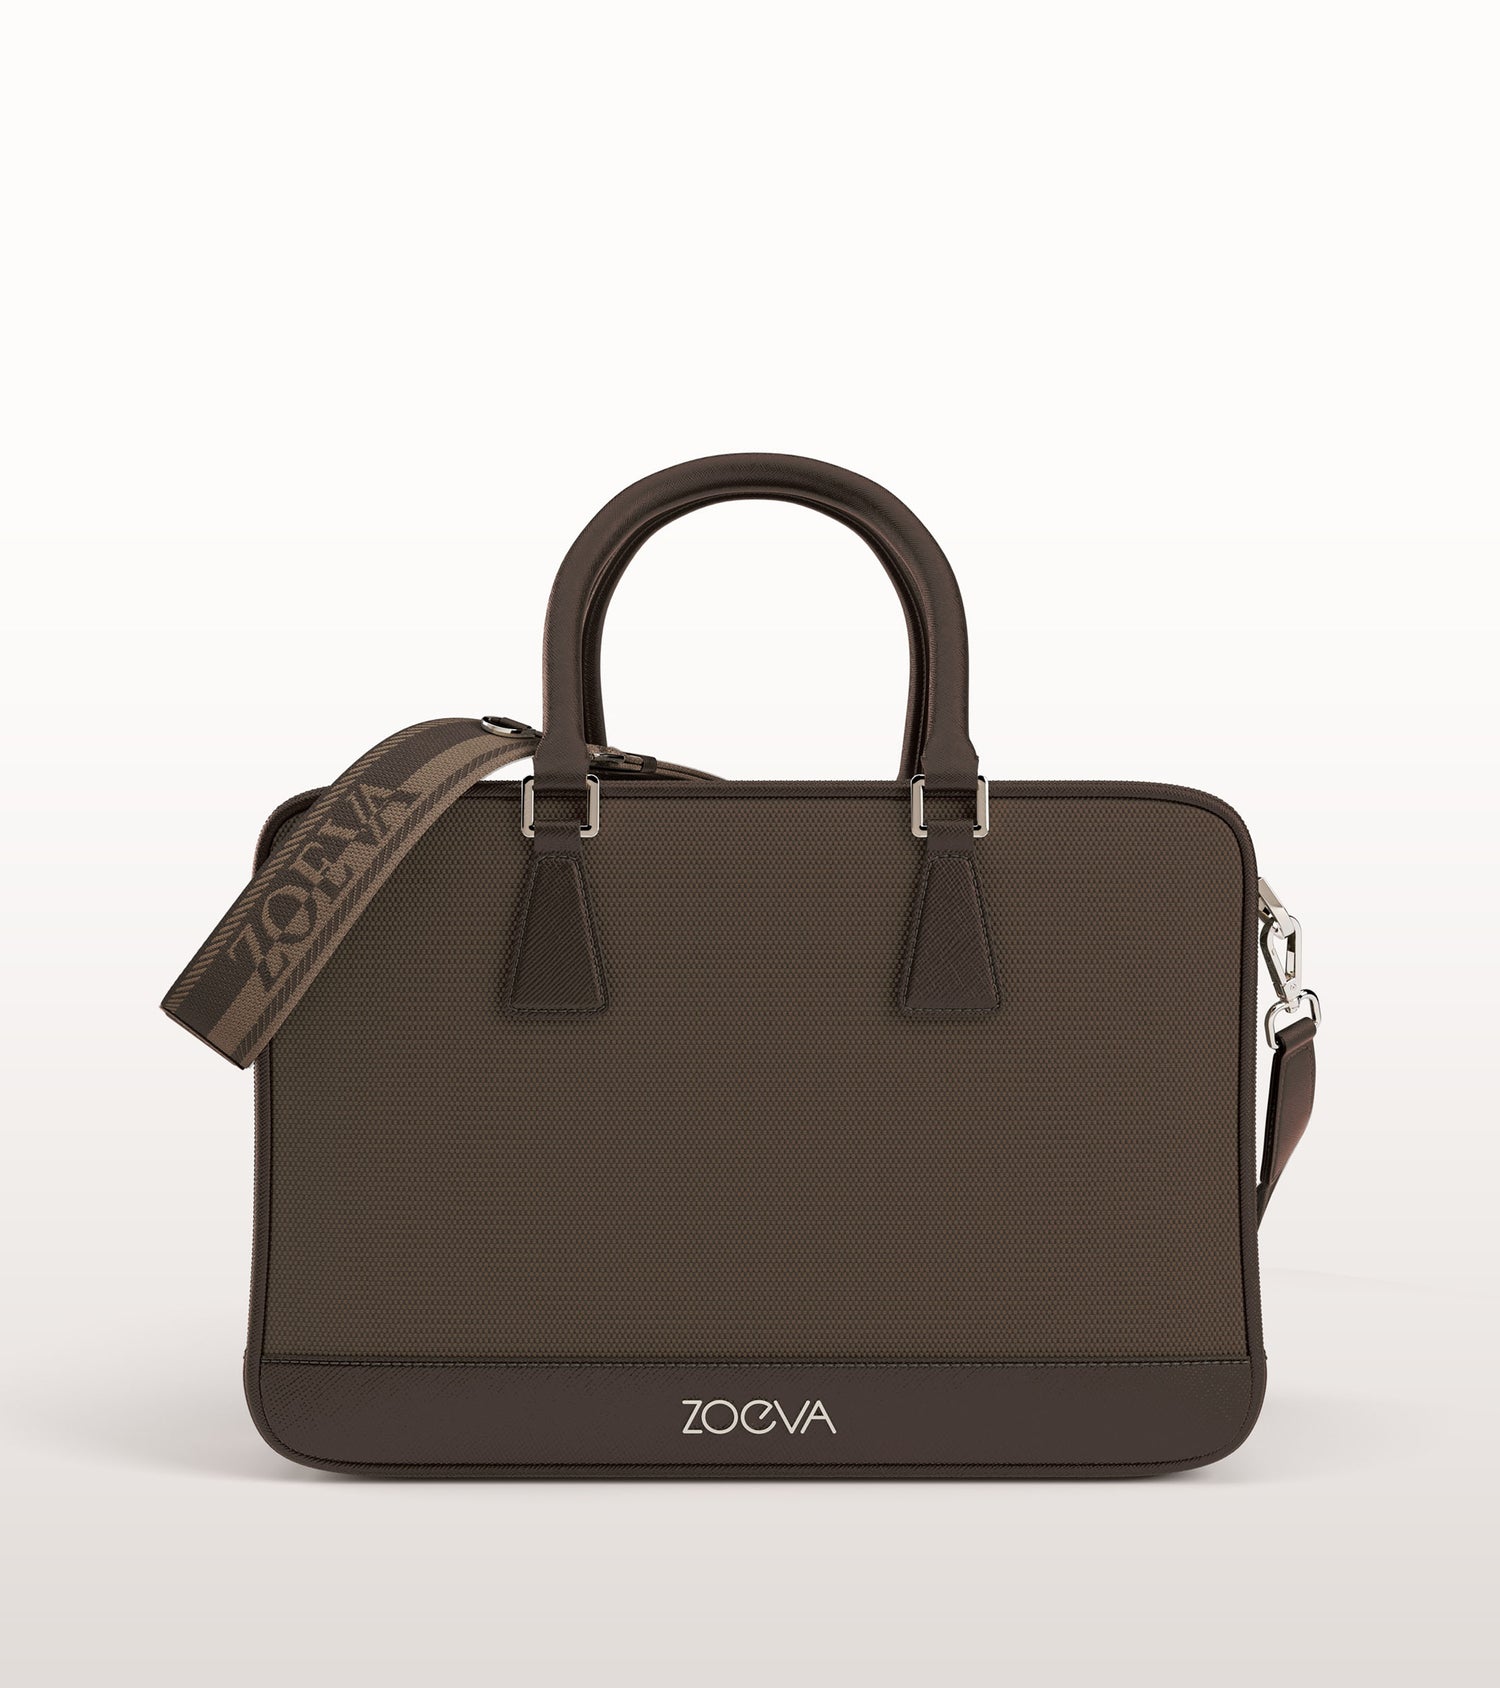 The Zoe Bag & The Complete Brush Set (Chocolate) Main Image featured